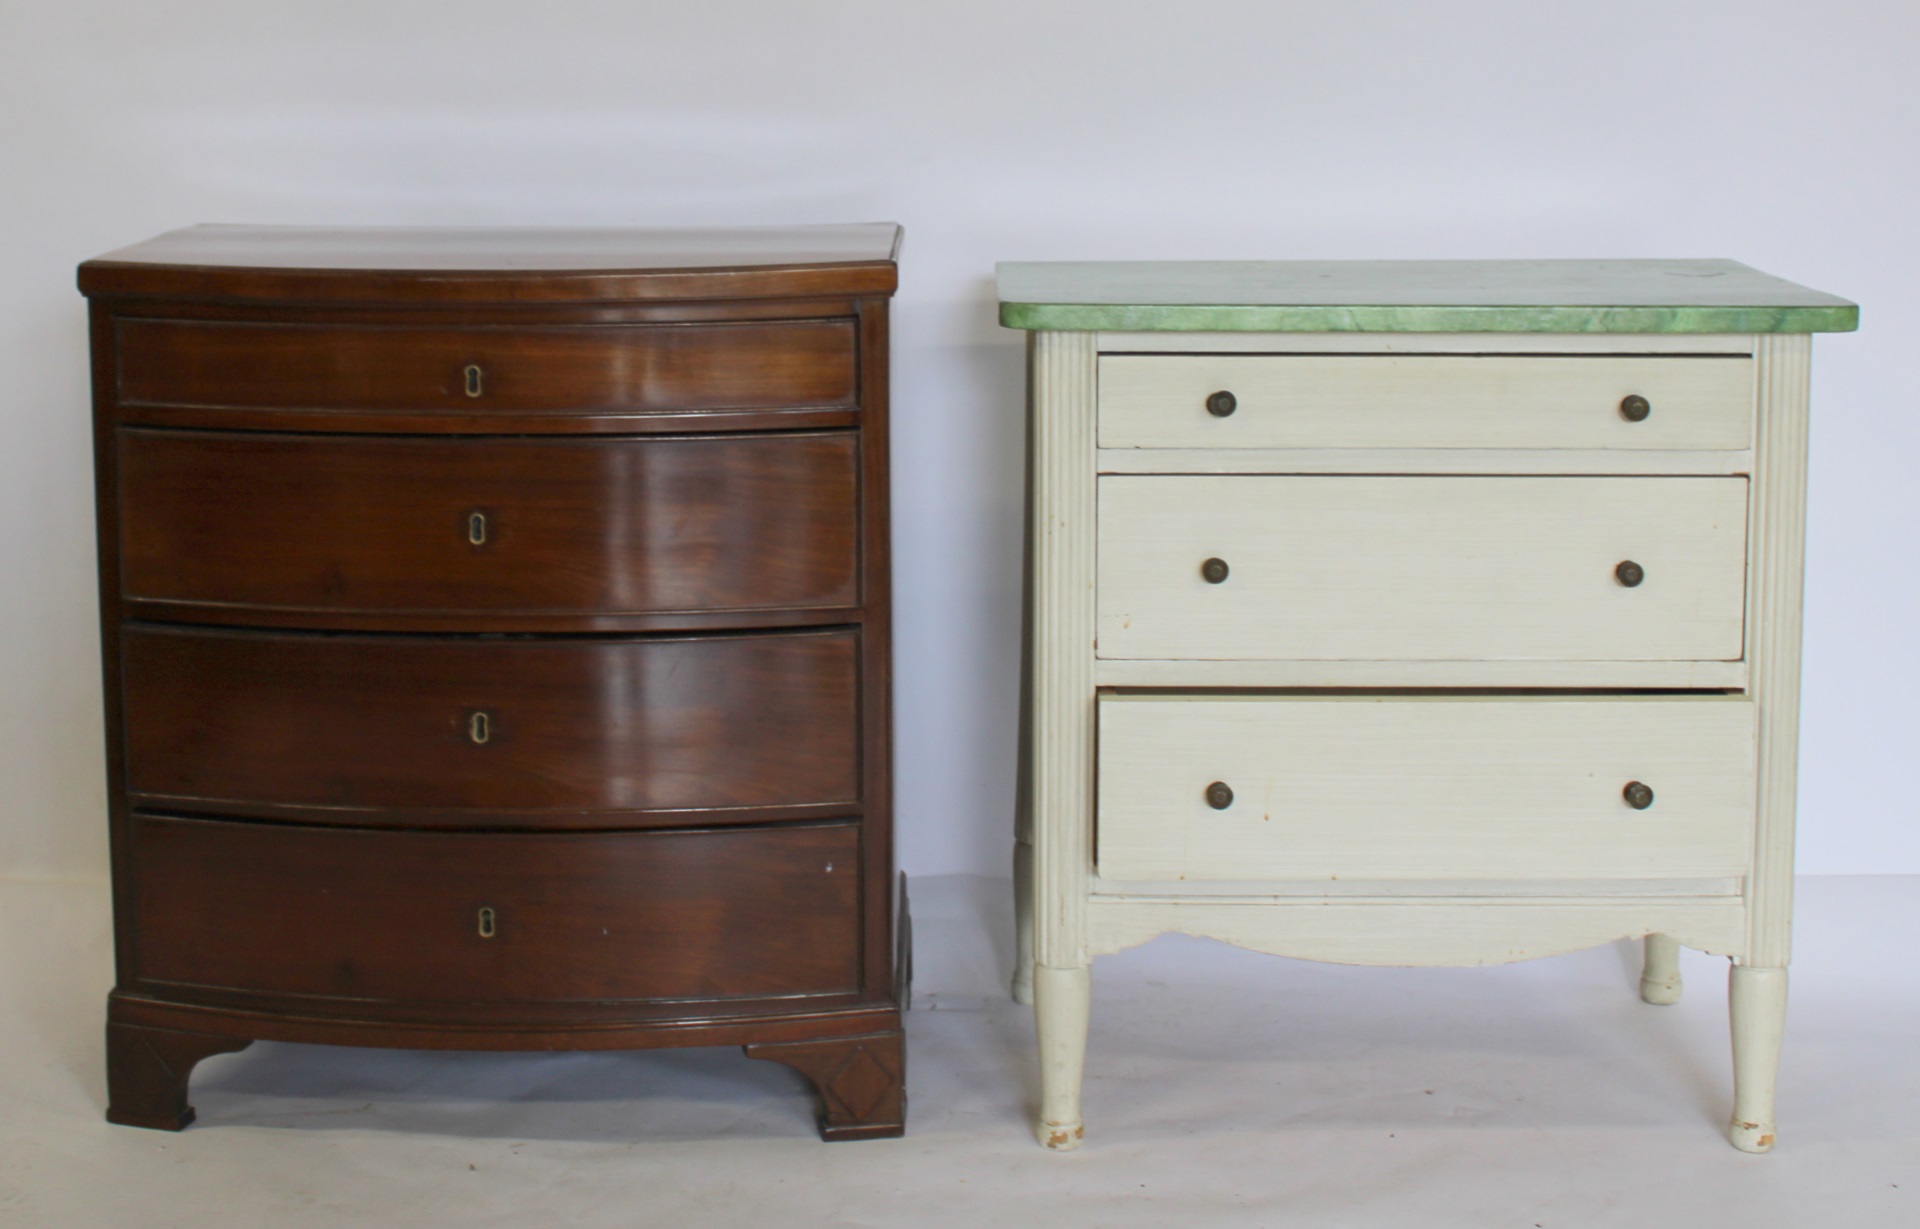 2 ANTIQUE SWEDISH CHESTS. 1 painted